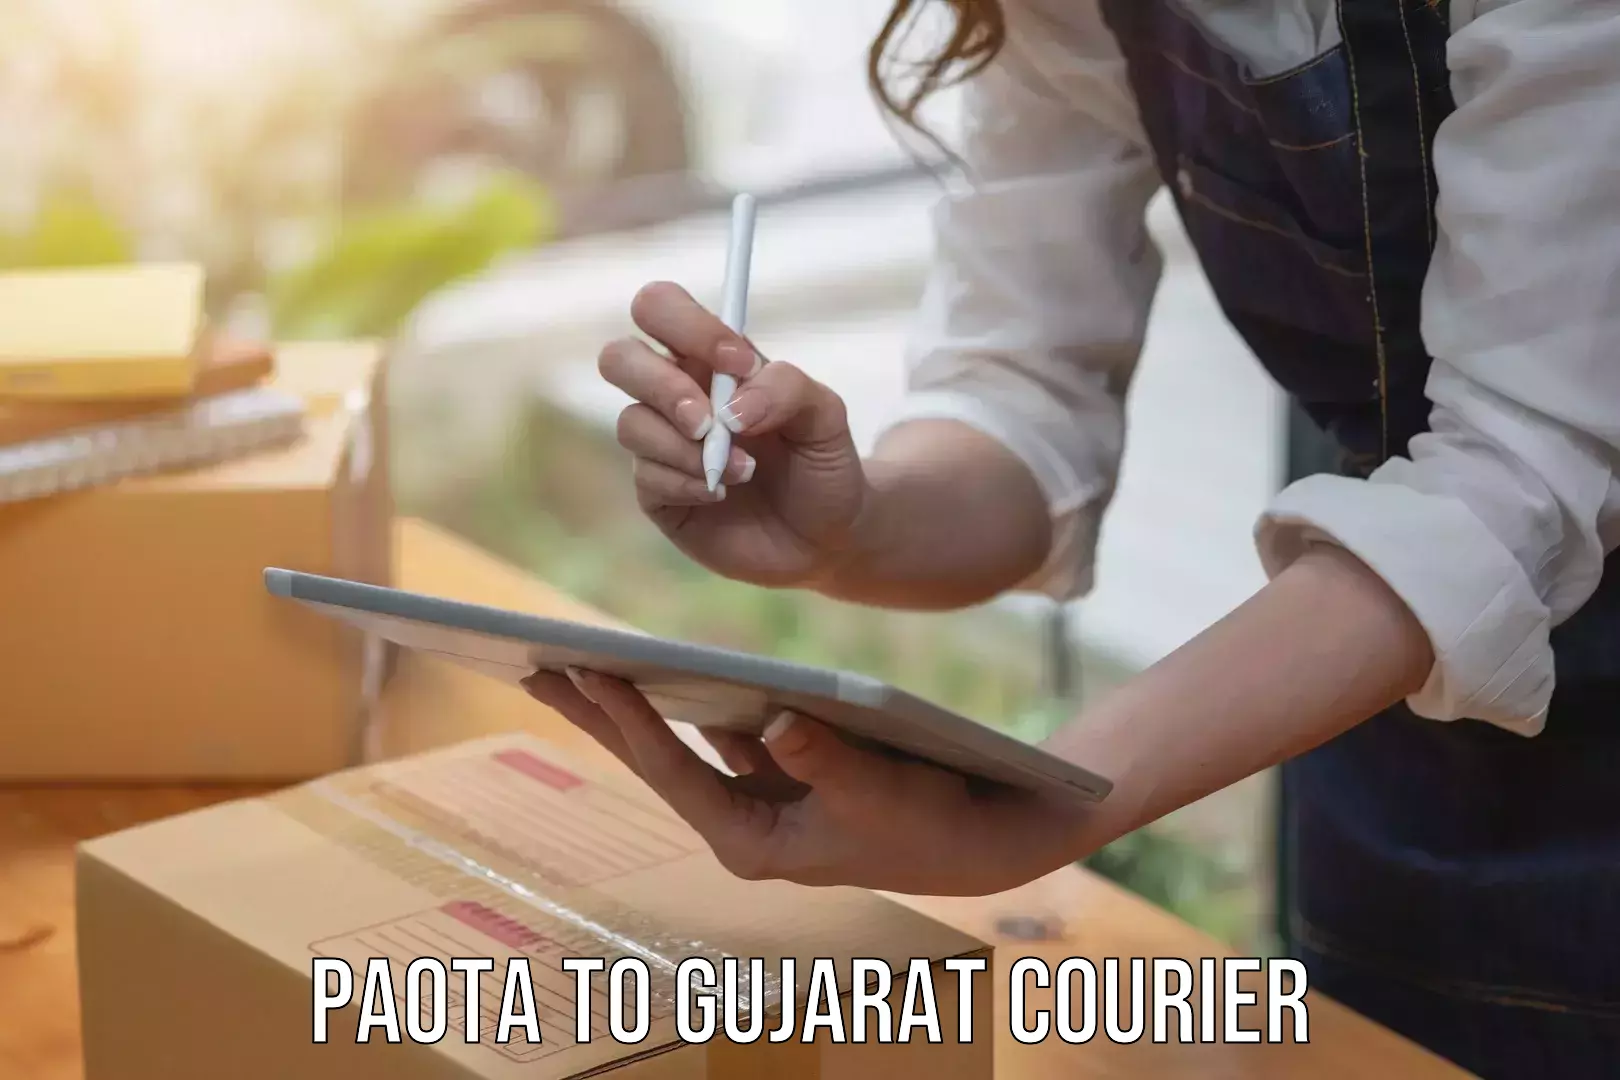 Courier service innovation Paota to Anand Agricultural University